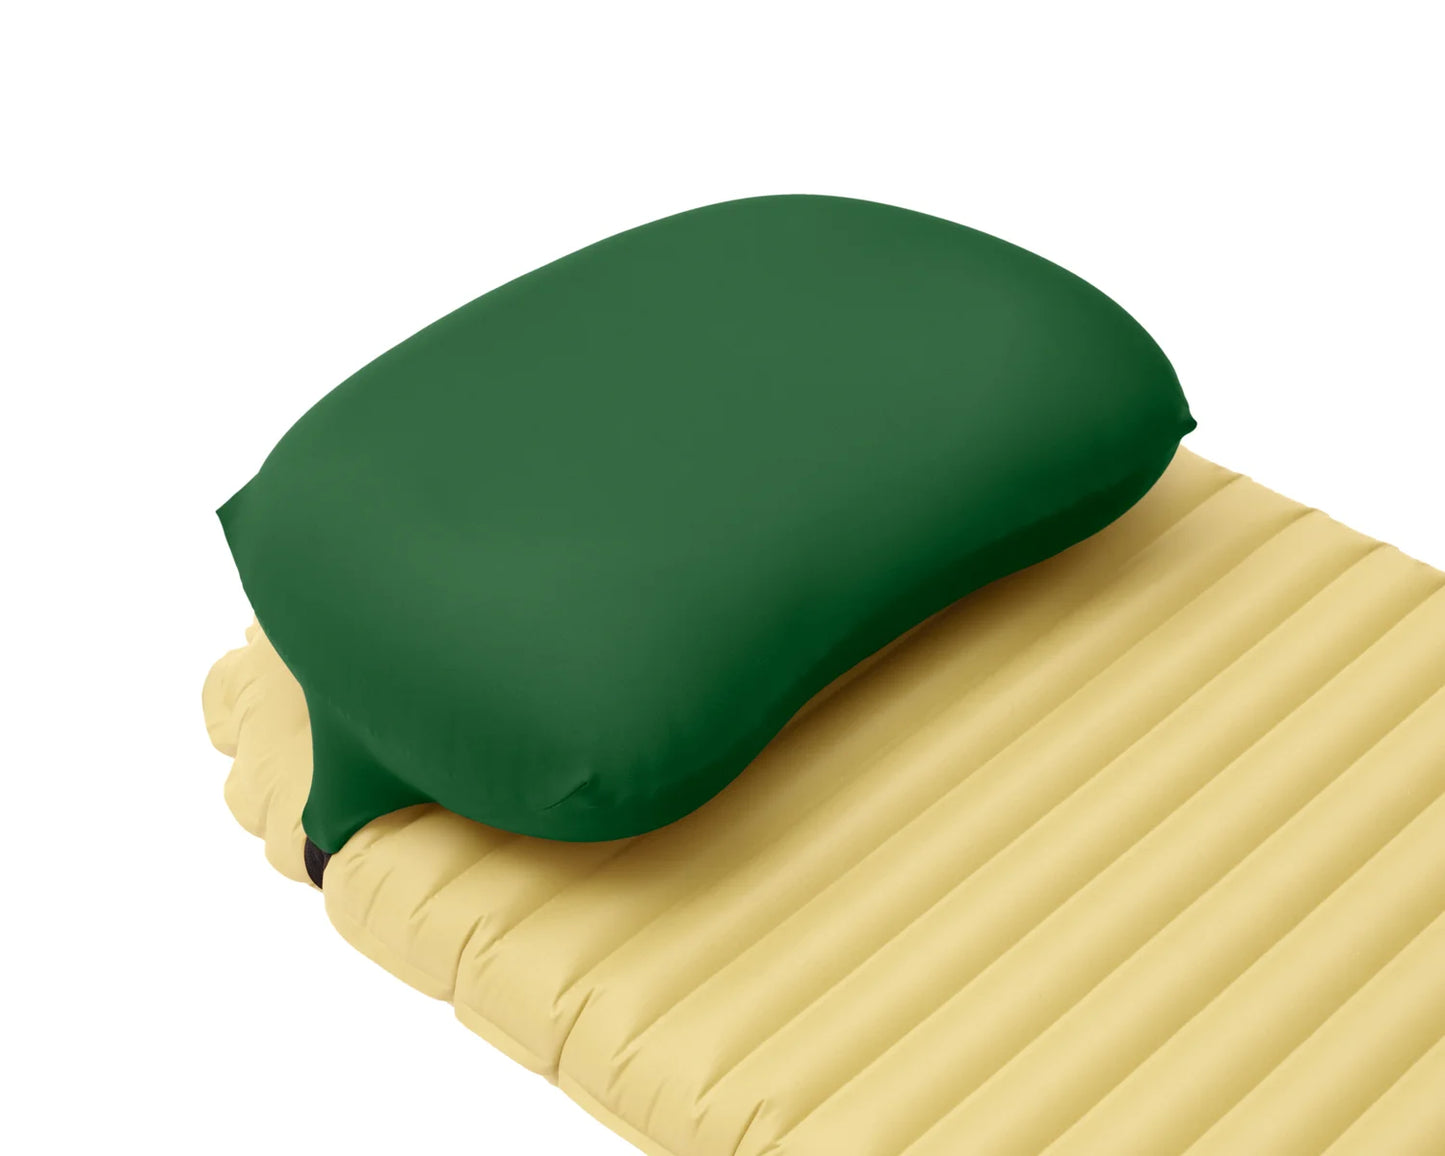 Pillow Strap medium in green side view. Backpacking pillowcase for attaching to a sleeping pad for better sleep camping.  